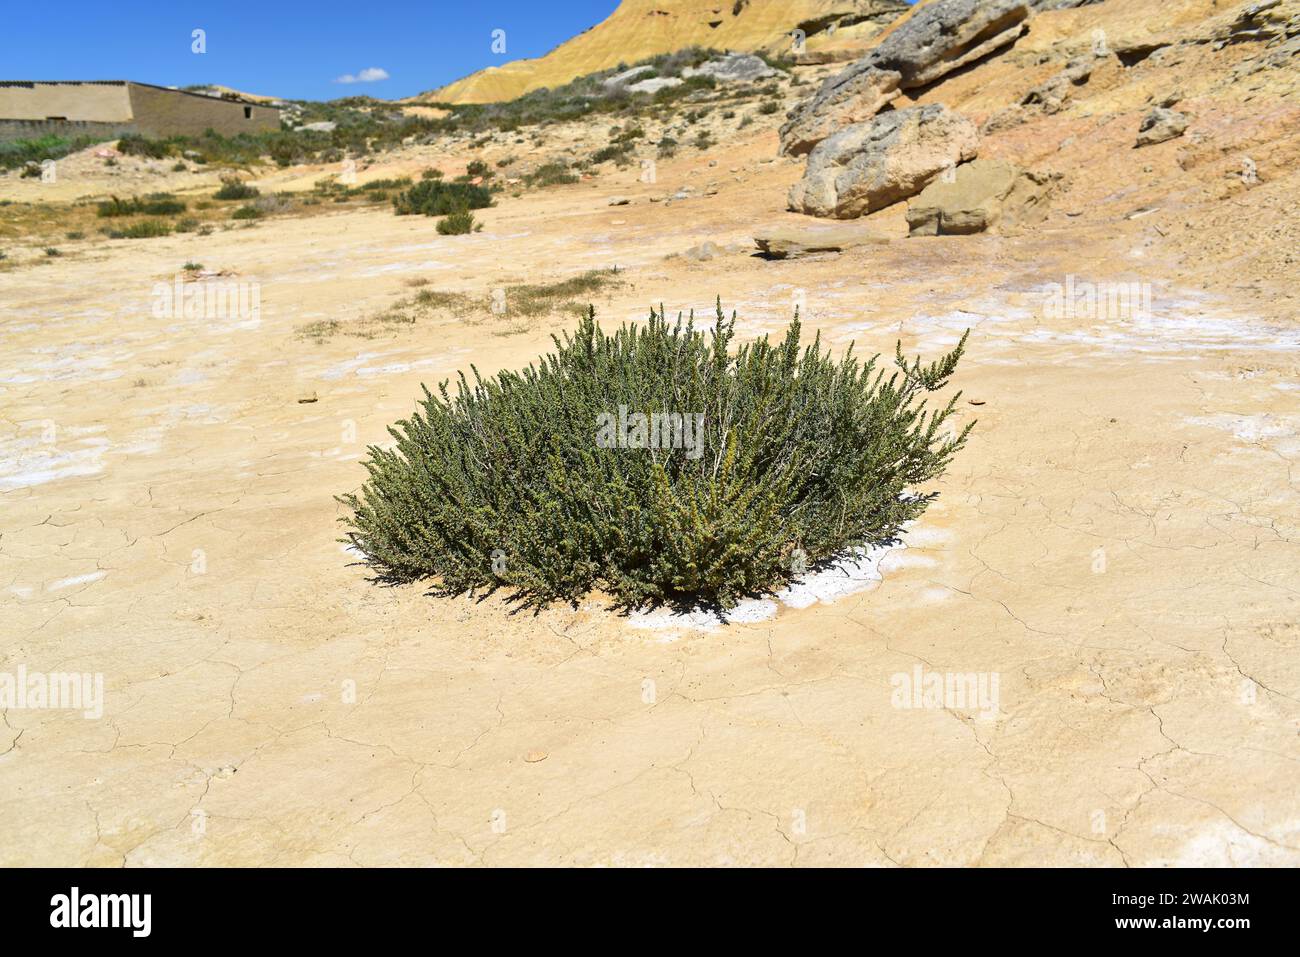 Mediterranean saltwort (Salsola vermiculata) is a shrub native to arids regions of southwestern Europe, north Africa and western Asia. This photo was Stock Photo